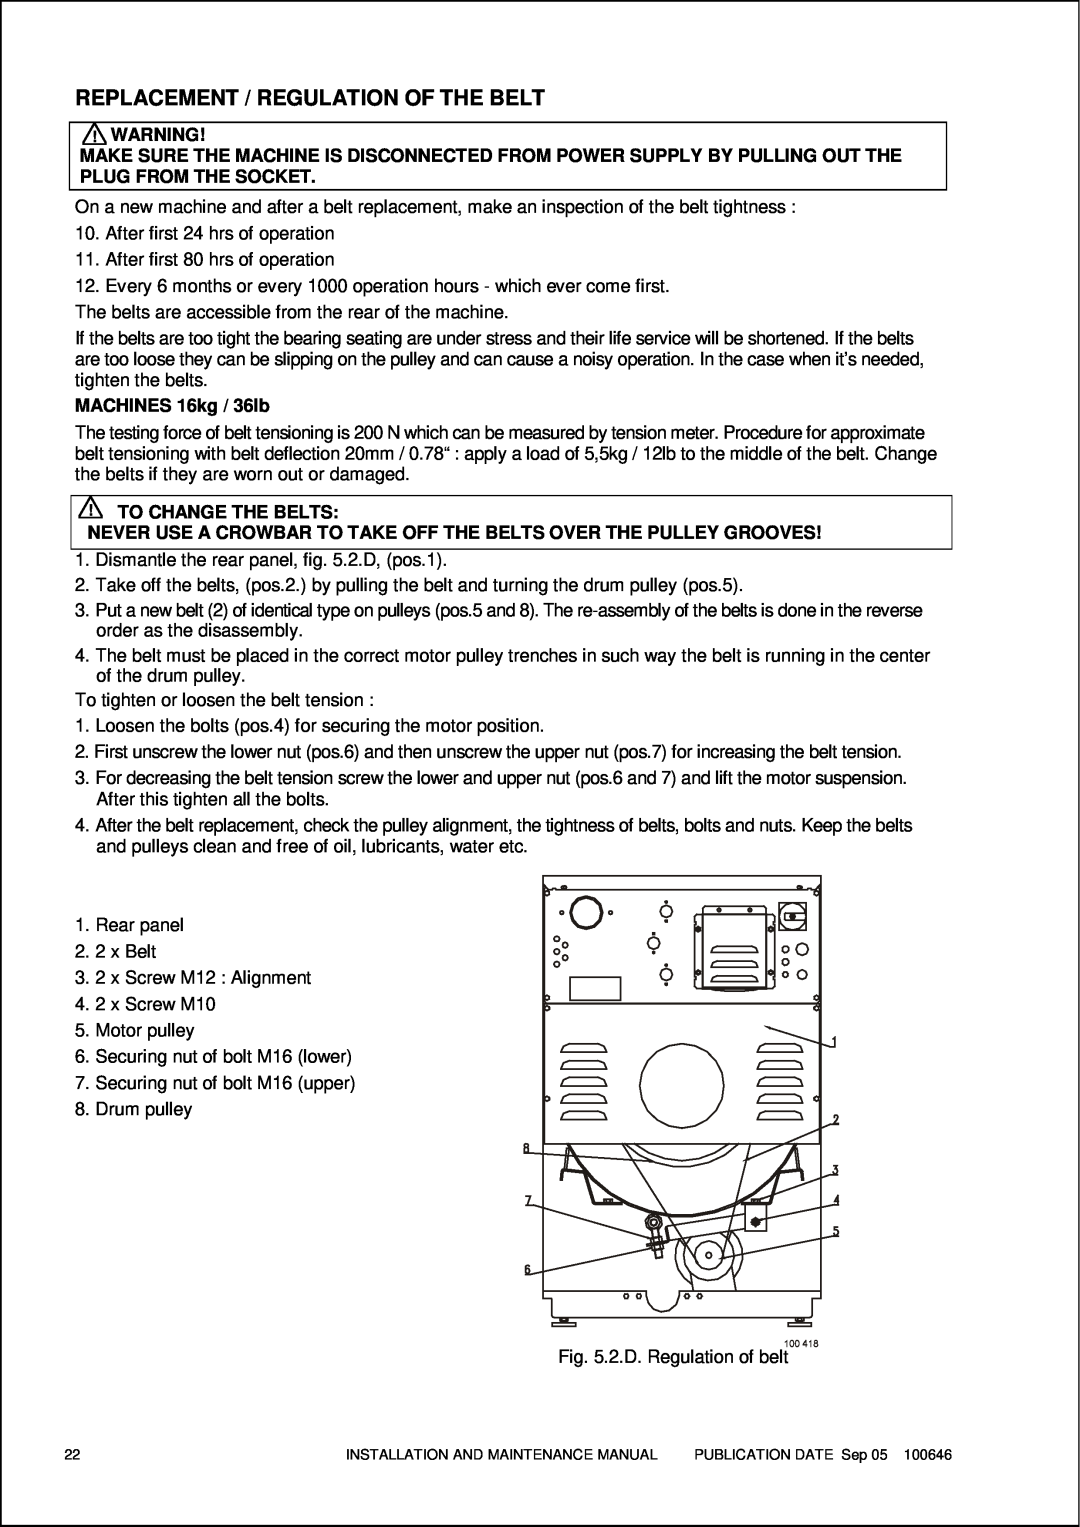 Maytag MFS 25-35 manual Replacement / Regulation Of The Belt, MACHINES 16kg / 36lb, To Change The Belts 